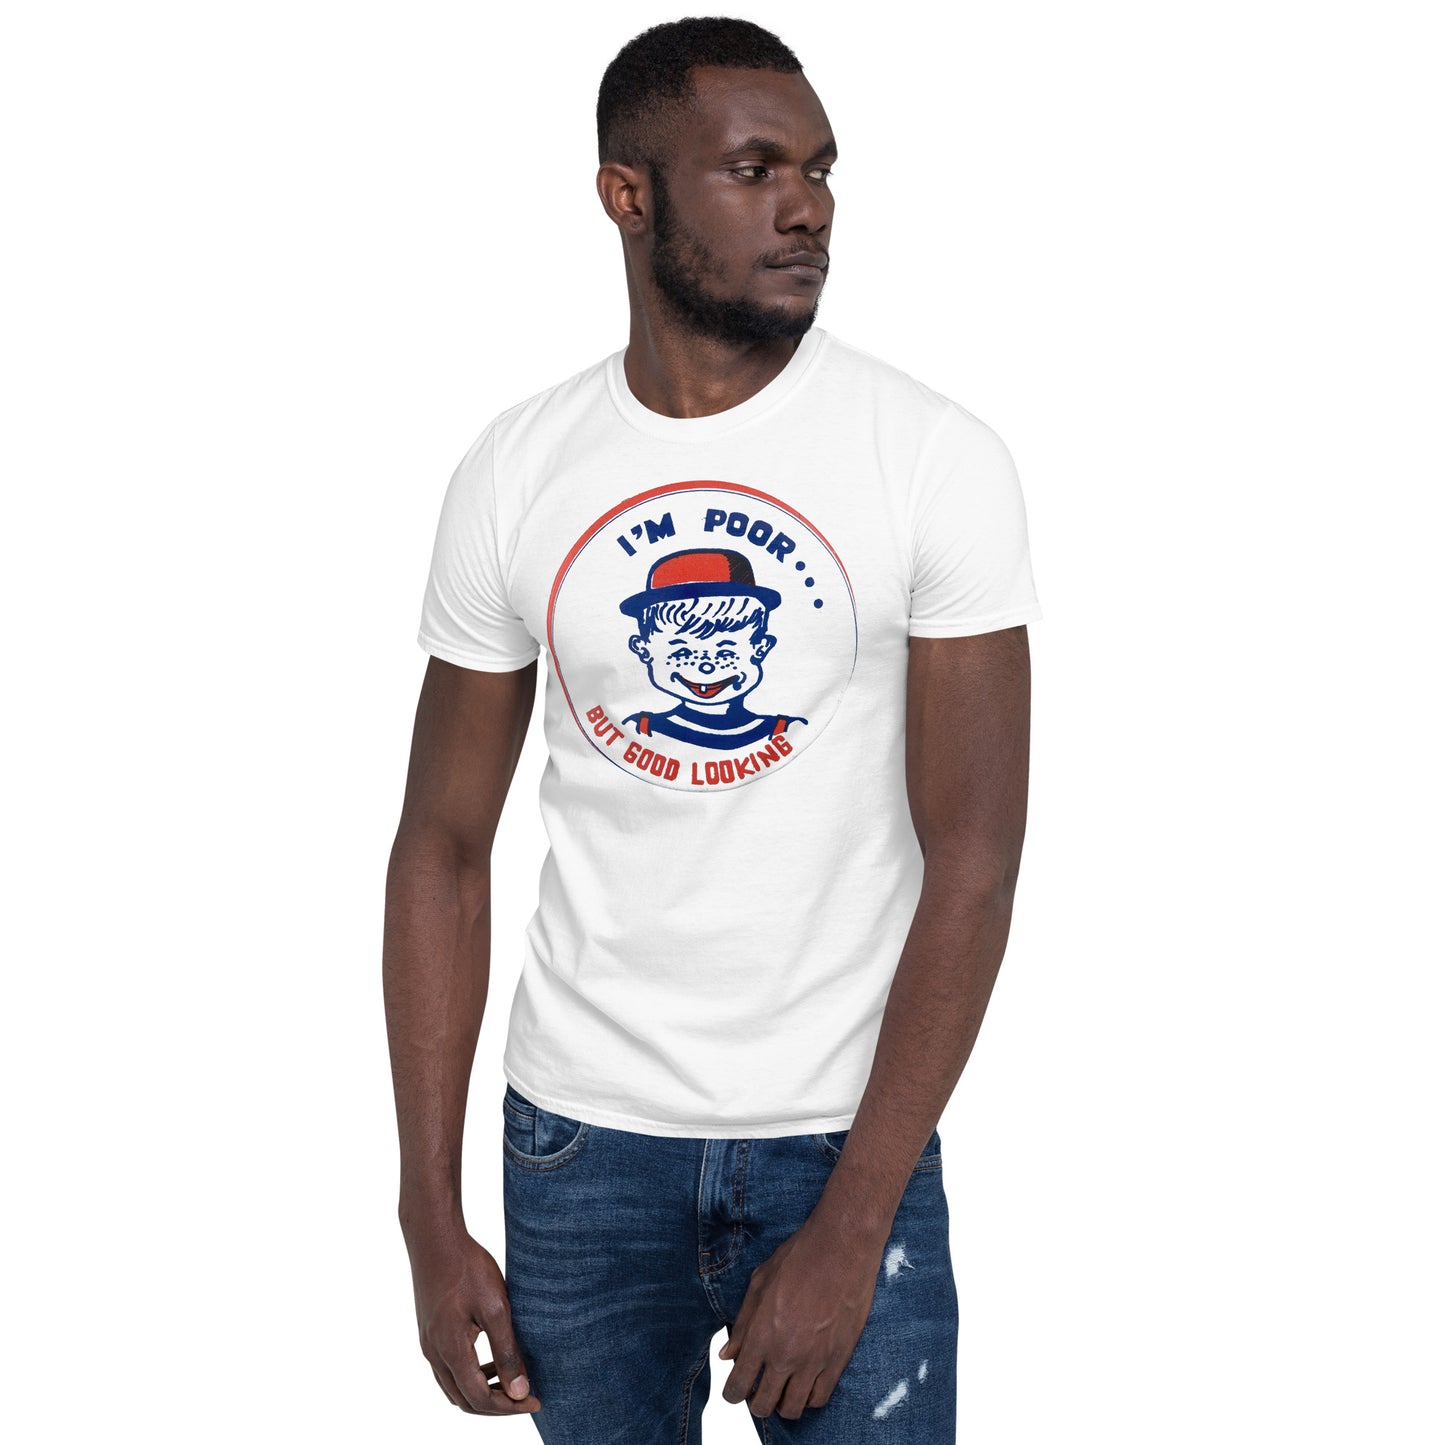 I'm Poor...But Good Looking Short-Sleeve Unisex T-Shirt